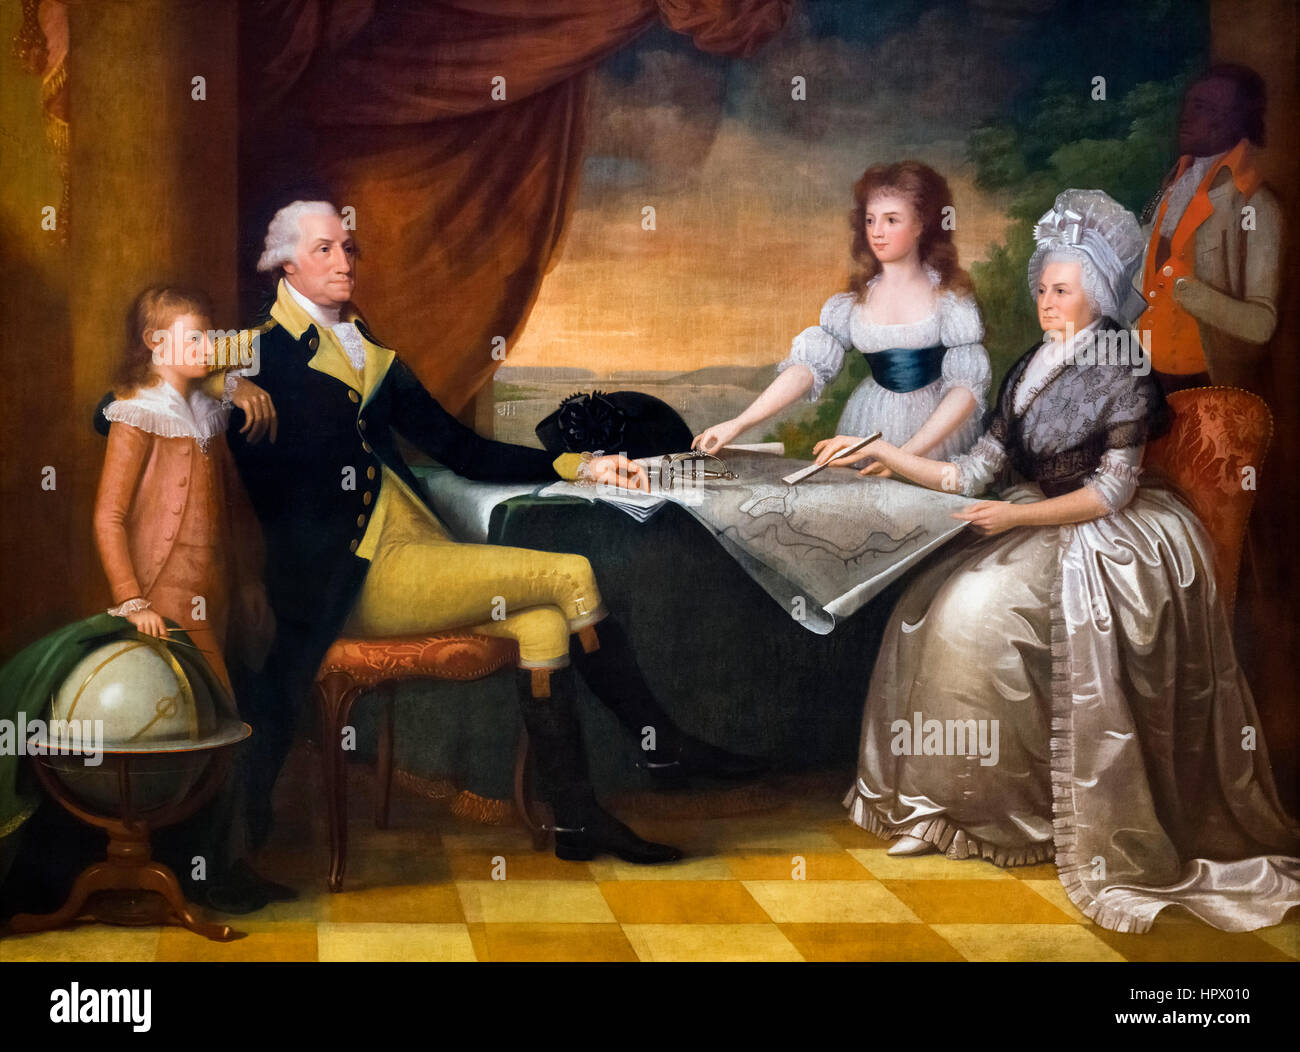 George Washington and his Family by Edward Savage, oil on canvas, c.1790-96. The portrait shows George and Martha Washington with their two children, Jack and Patsy. Stock Photo